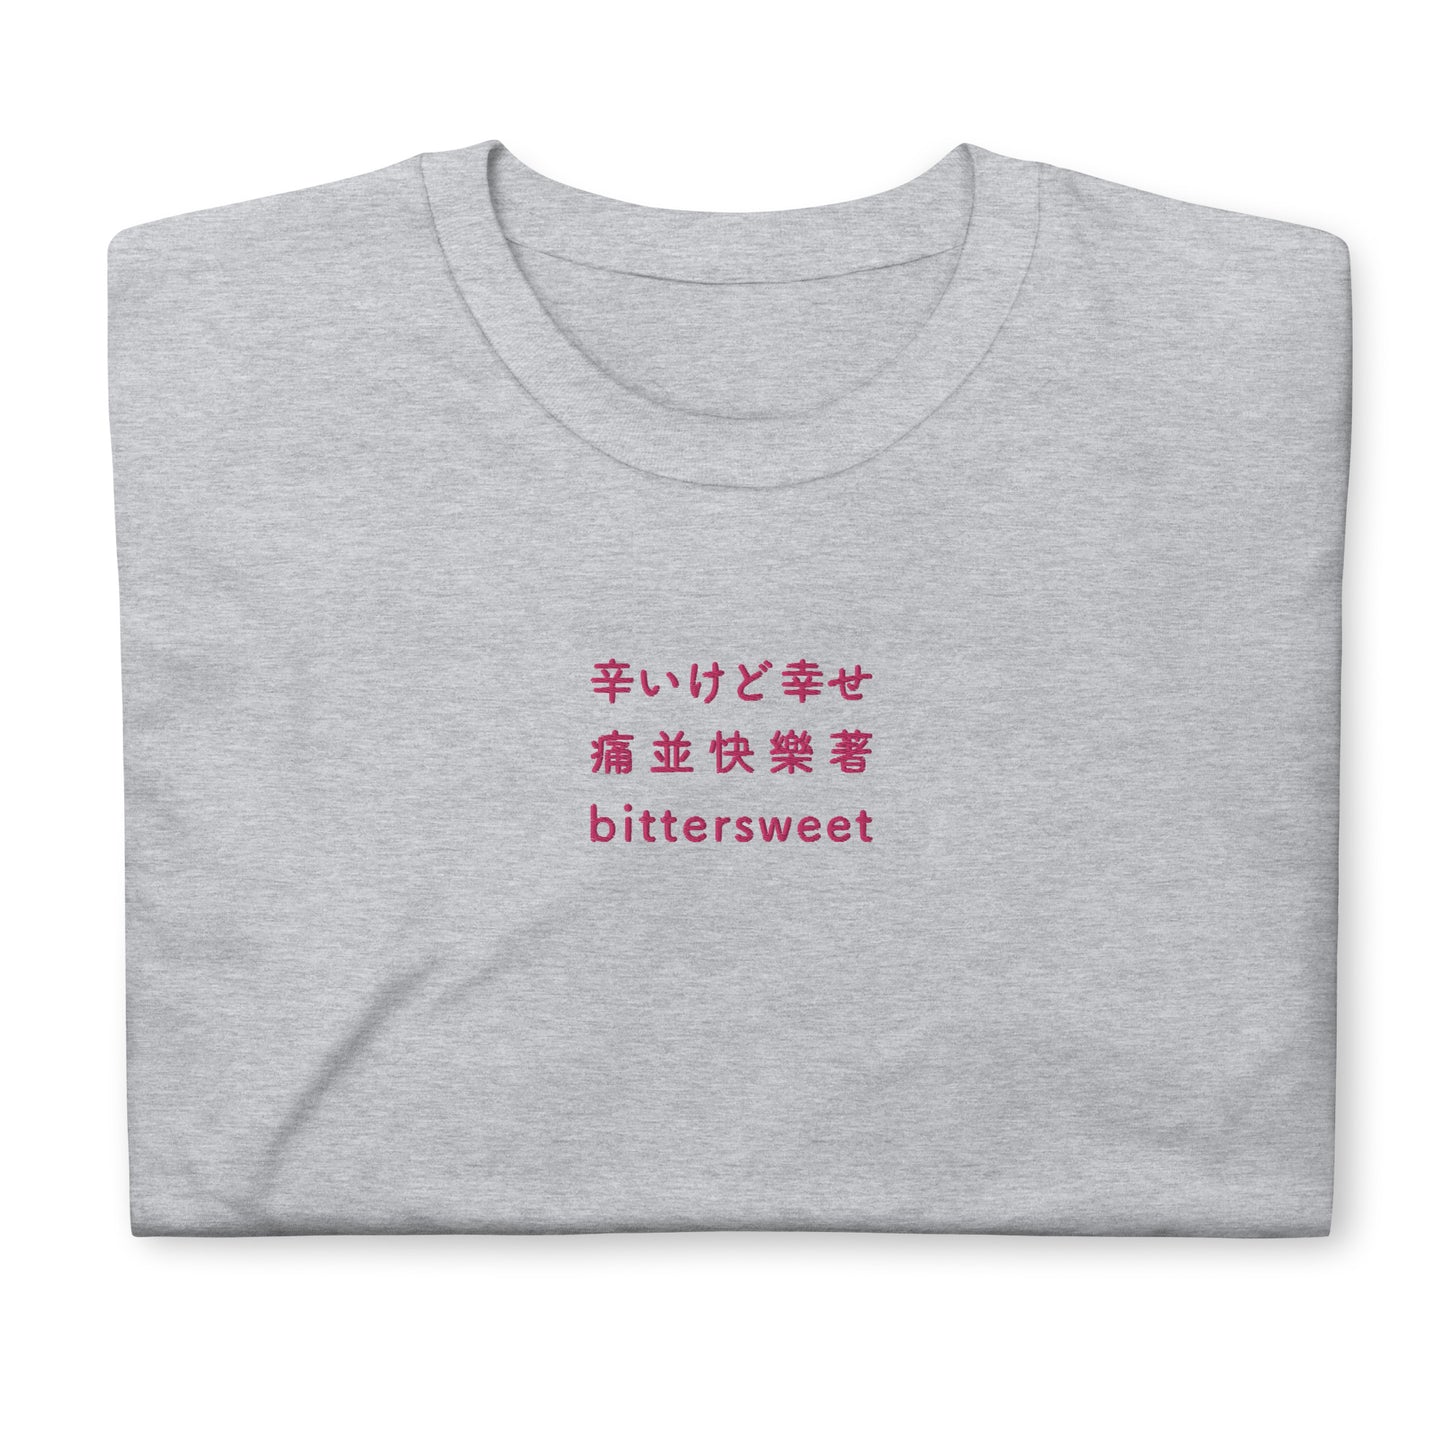 Light Gray High Quality Tee - Front Design with an Pink Embroidery "Bittersweet" in Japanese,Chinese and English